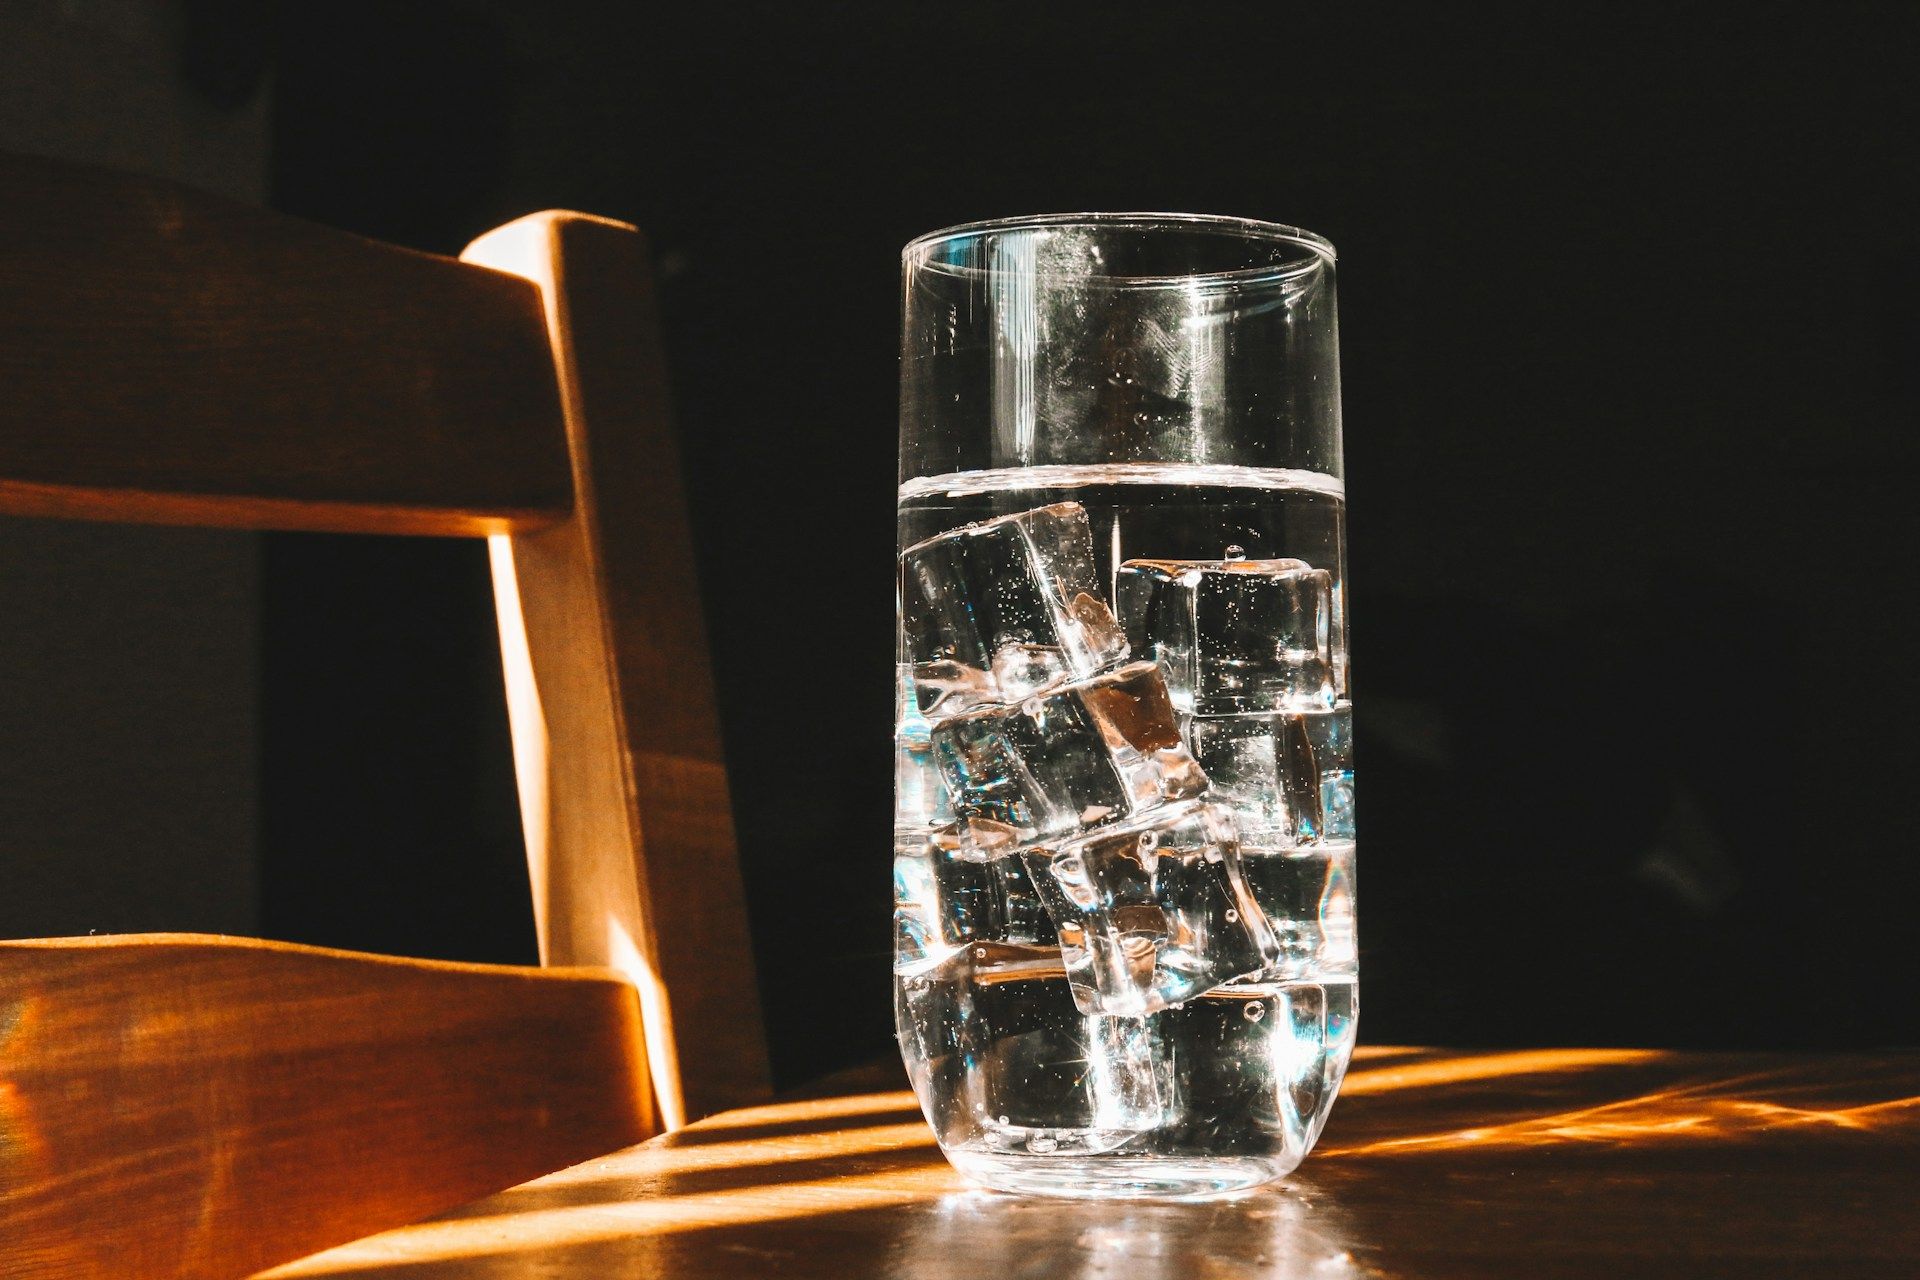 A tall glass of ice water on a wooden surface, illuminated by sunlight with a dark background.